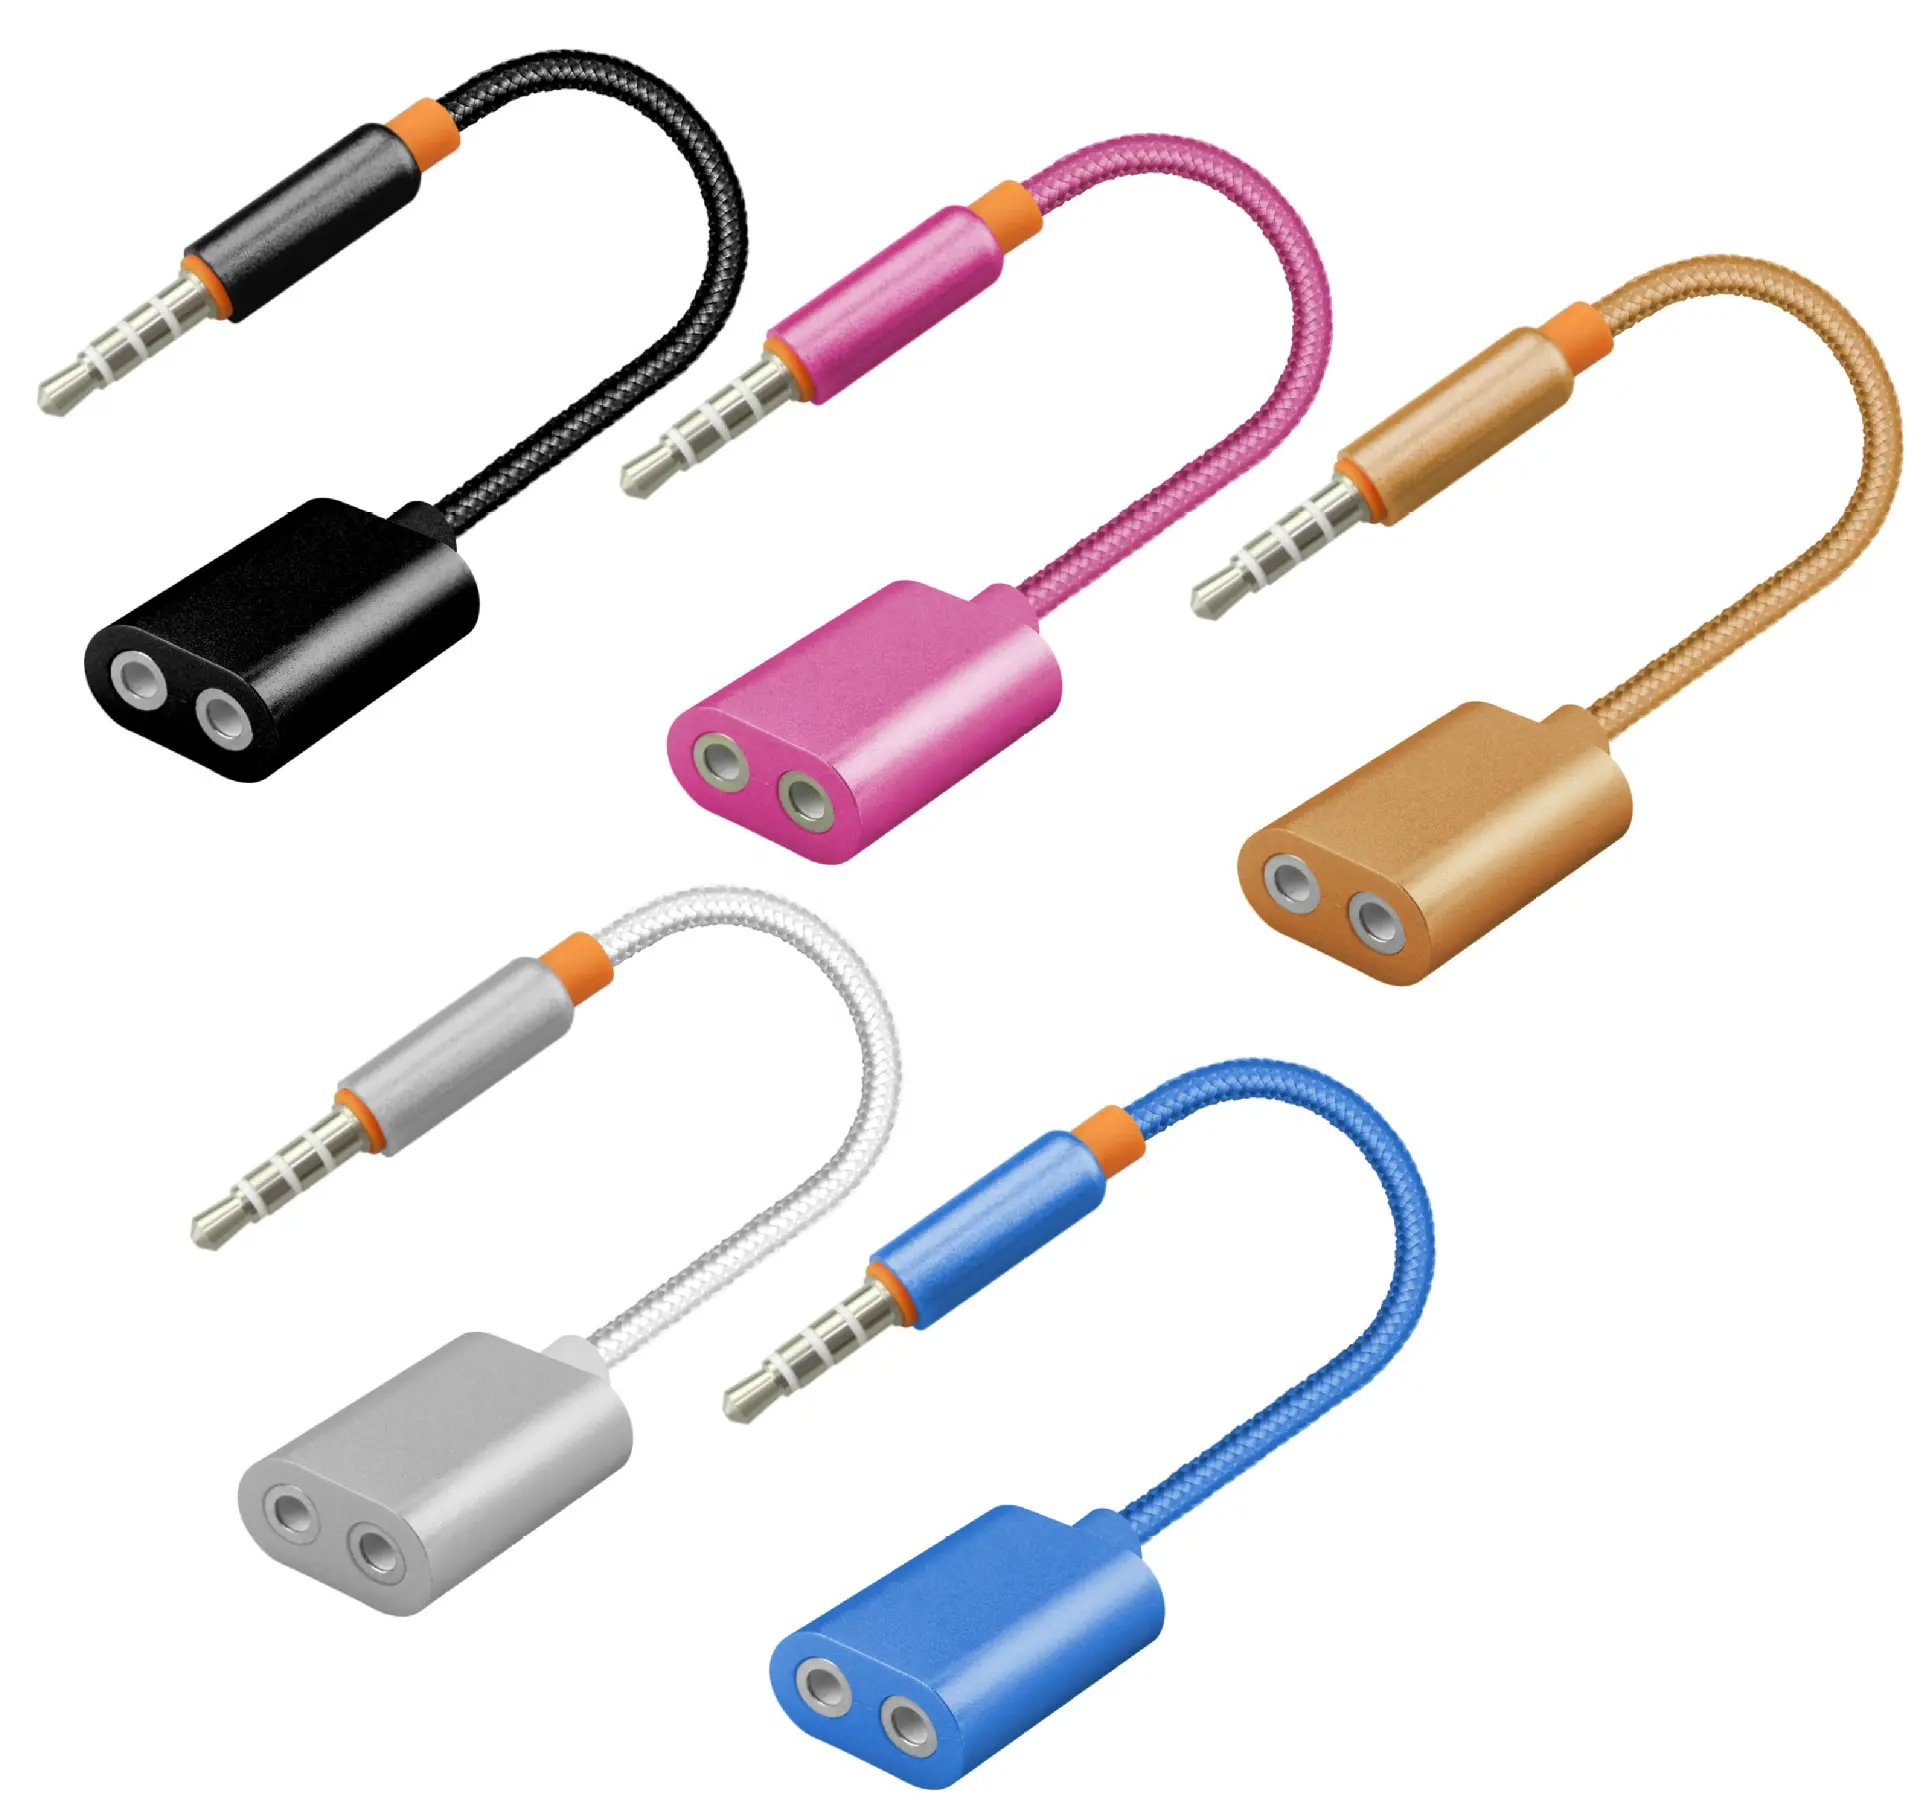 1 MALE to 2 FEMALE CABLE AUDIO EXTENSION 3.5mm earphone headphone headsete y splitter audio cable for cellphone sharing